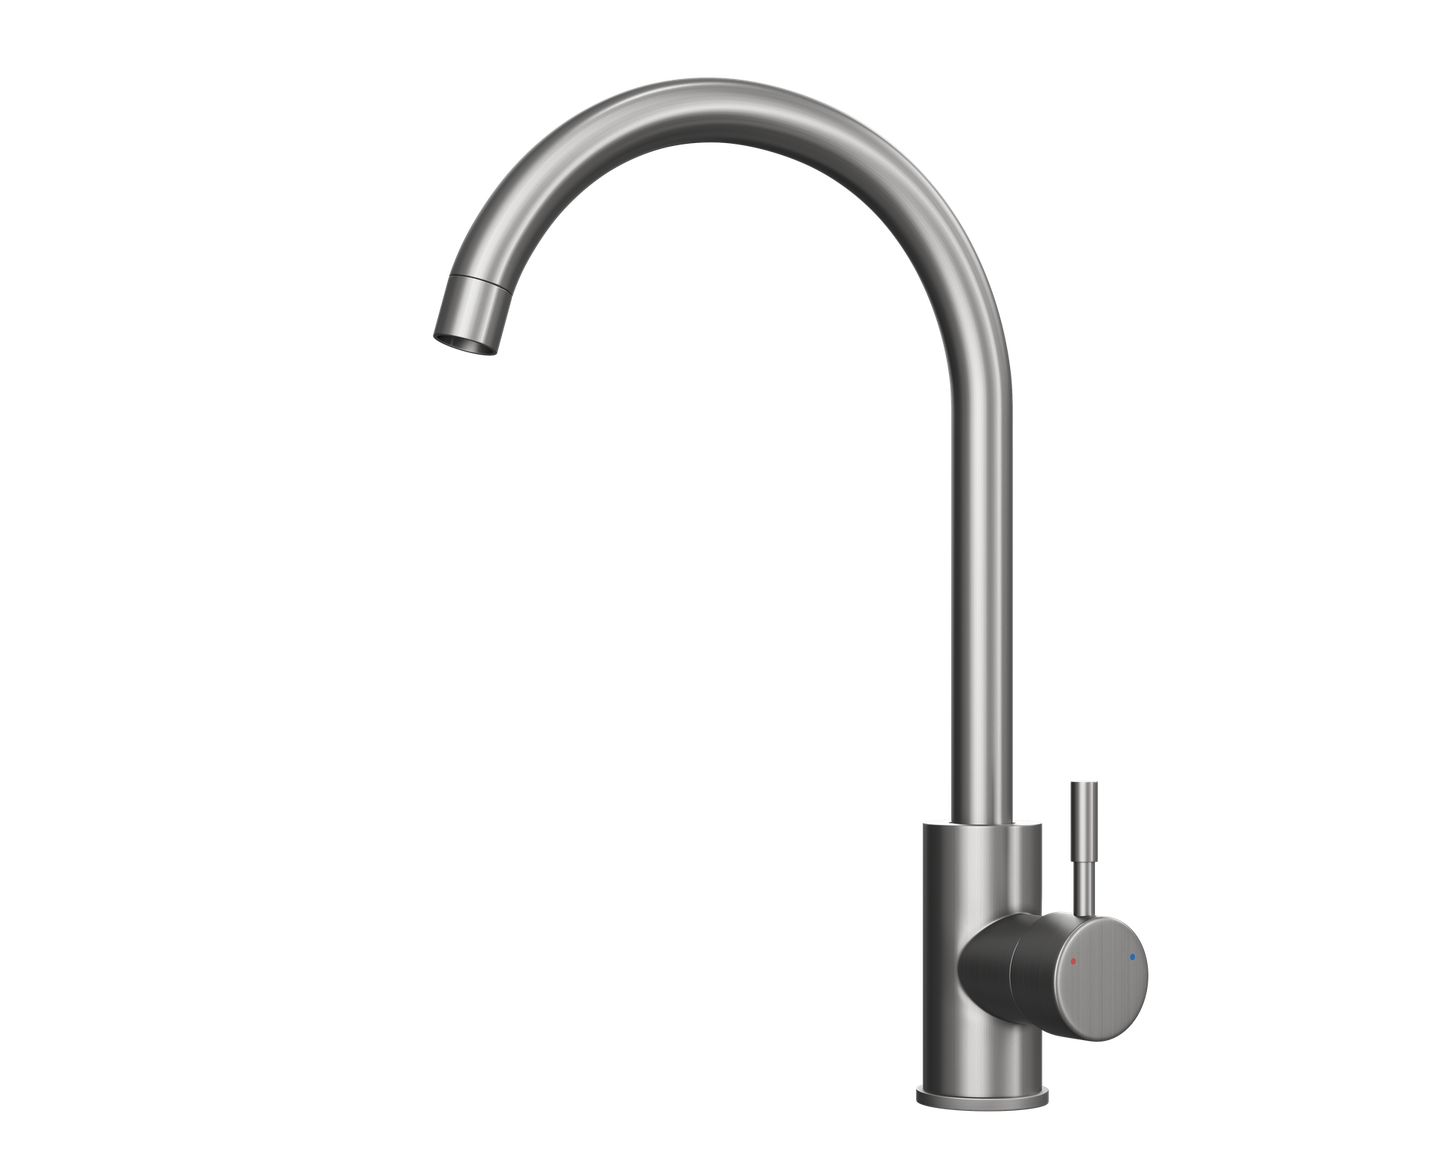 Close up image of a chrome single lever mixer tap Stainless Steel Kitchen Mixer Tap